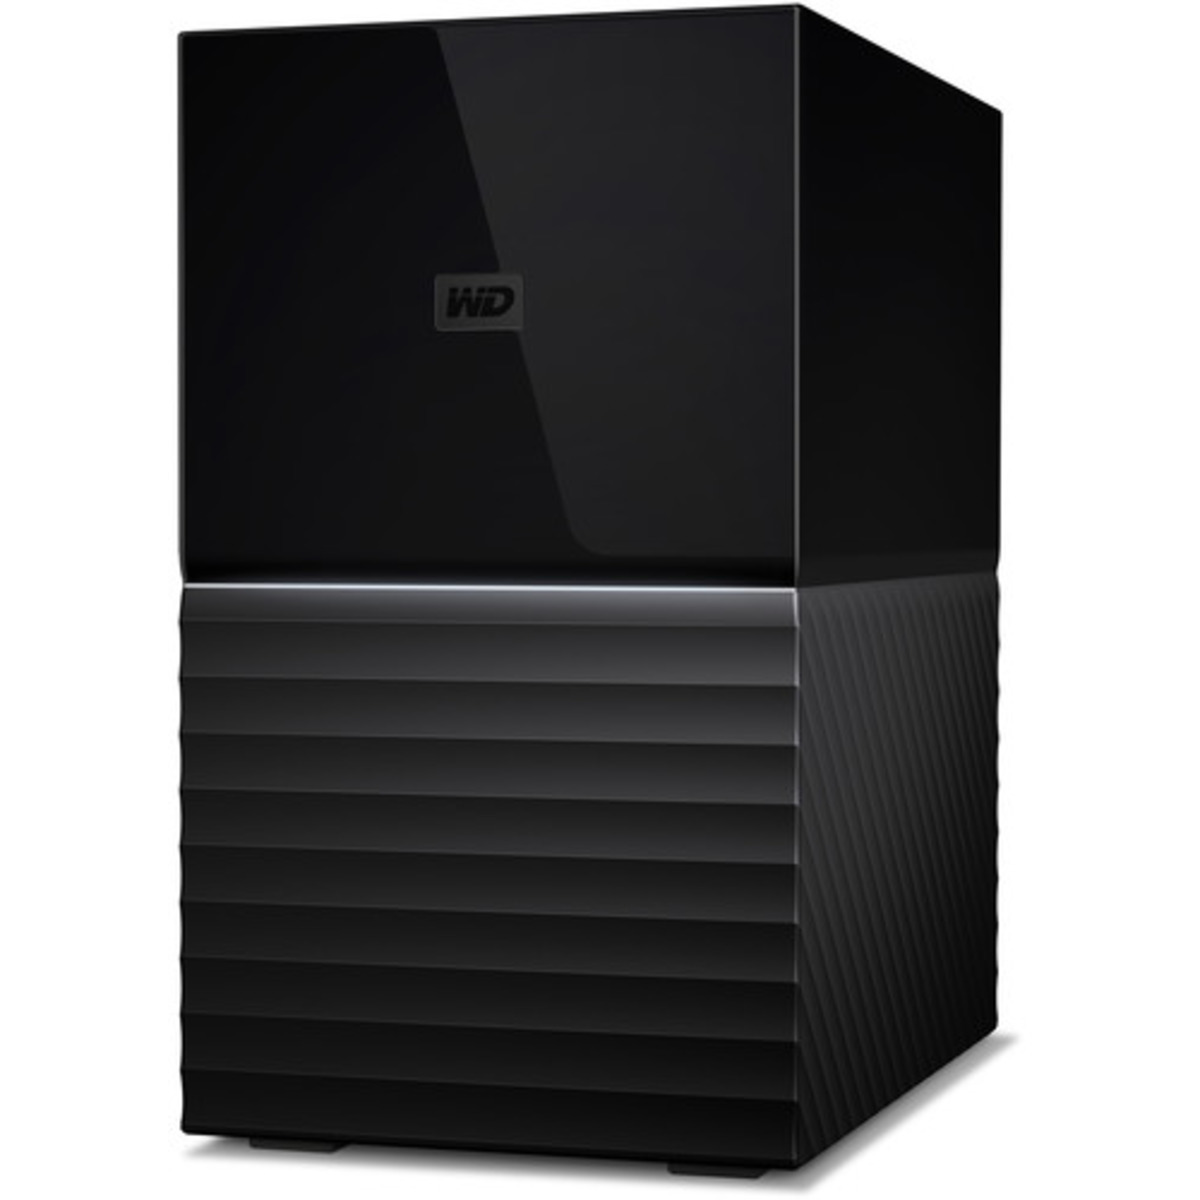 Western Digital My Book DUO Gen 2 20tb 2-Bay Desktop Personal / Basic Home / Small Office DAS - Direct Attached Storage Device 1x20tb Western Digital Gold WD202KRYZ 3.5 7200rpm SATA 6Gb/s HDD ENTERPRISE Class Drives Installed - Burn-In Tested - ON SALE My Book DUO Gen 2